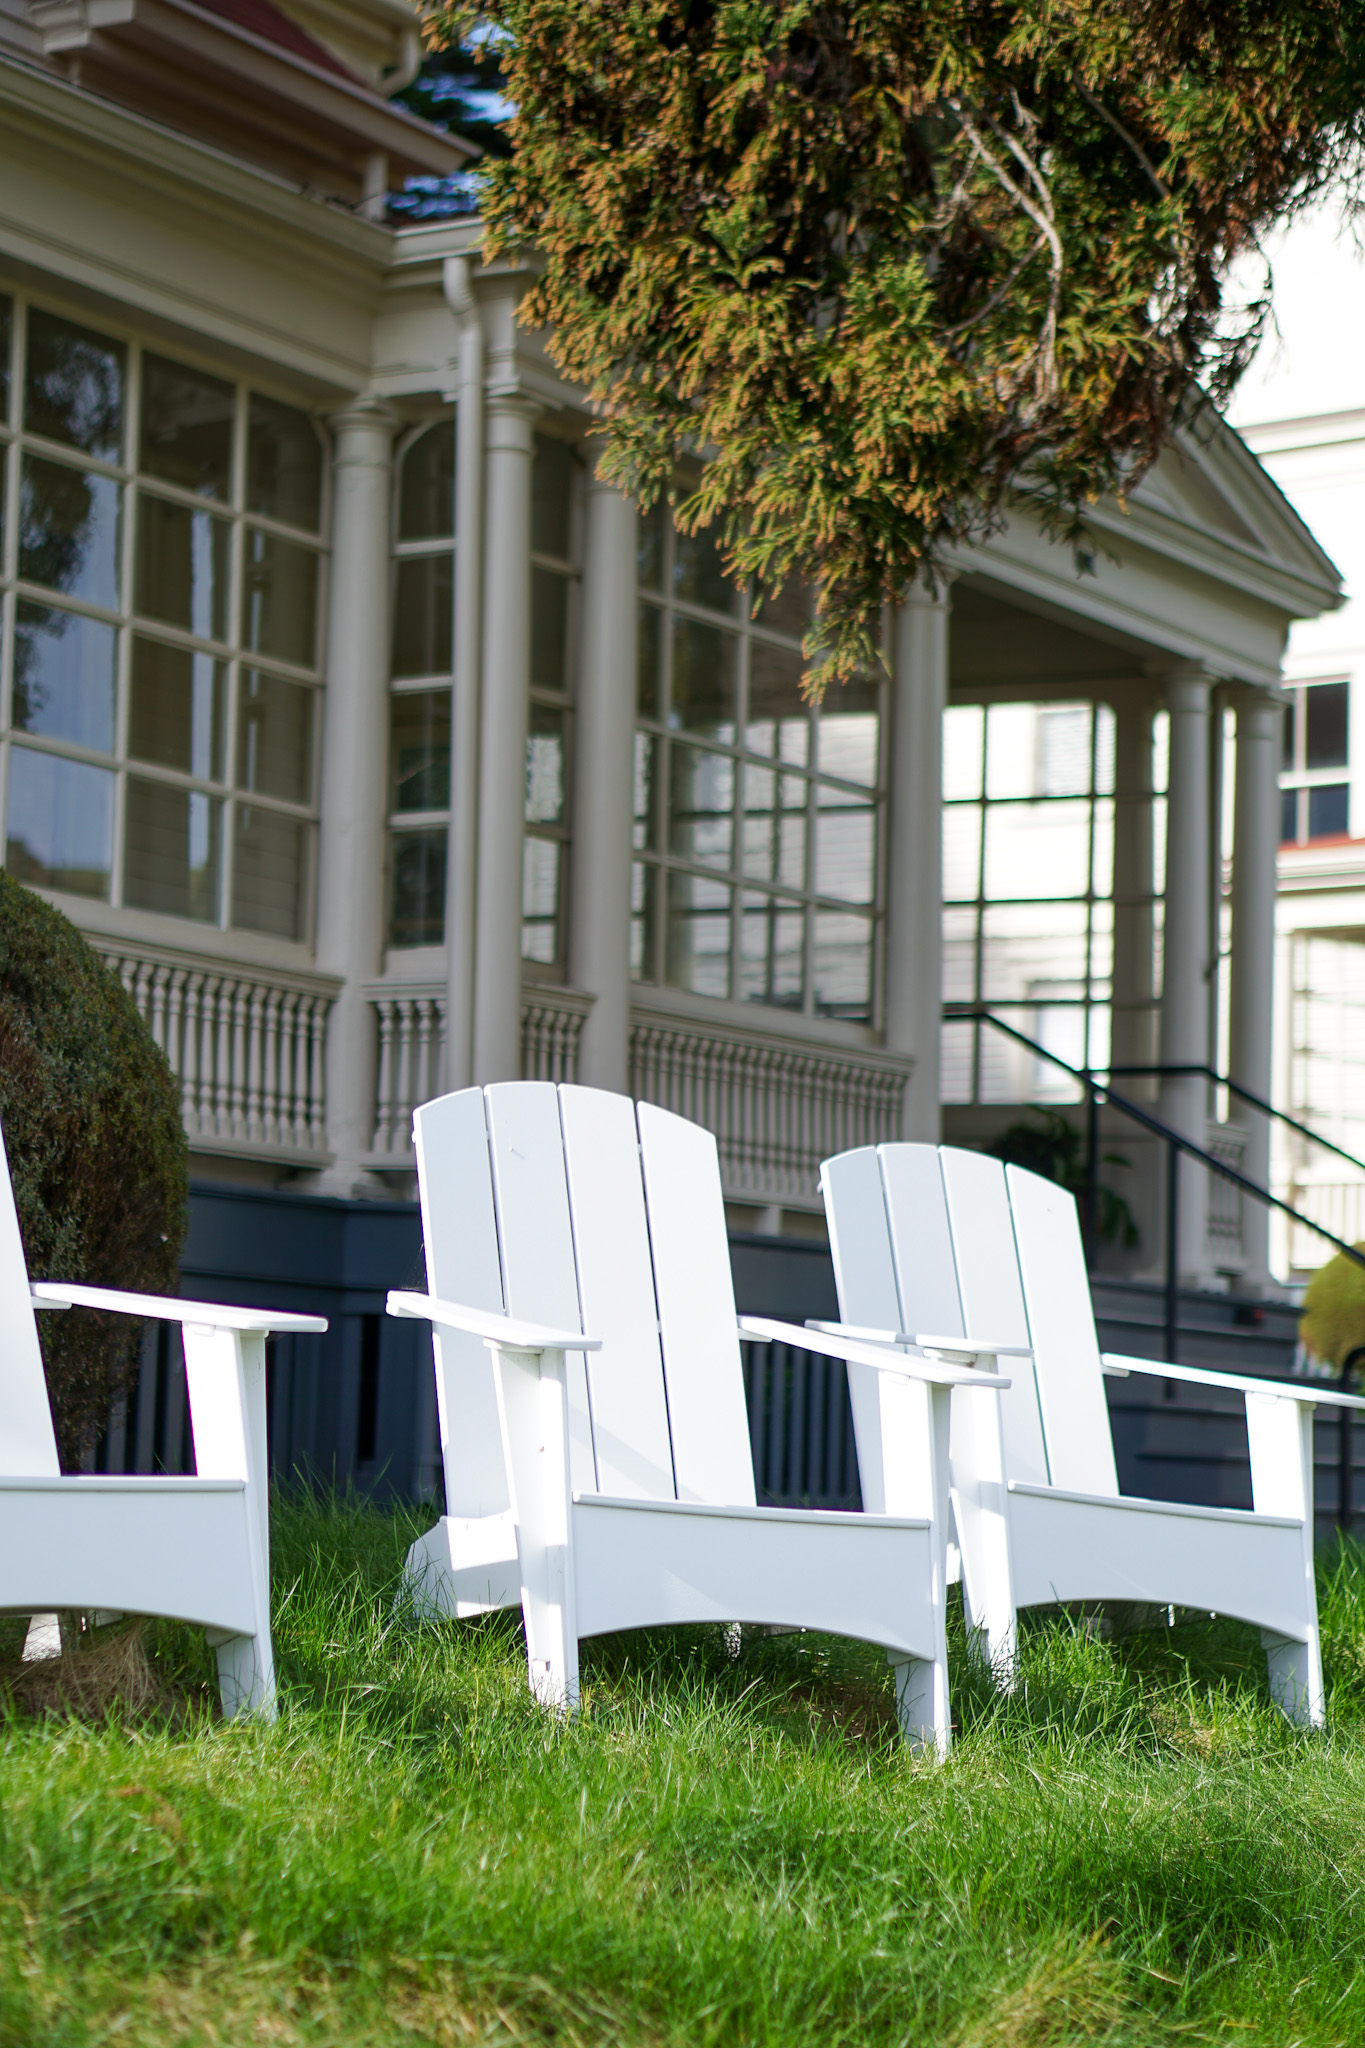 Luxury Travel Guide to Sausalito California: Discover This Chic & Charming Escape by The Bay